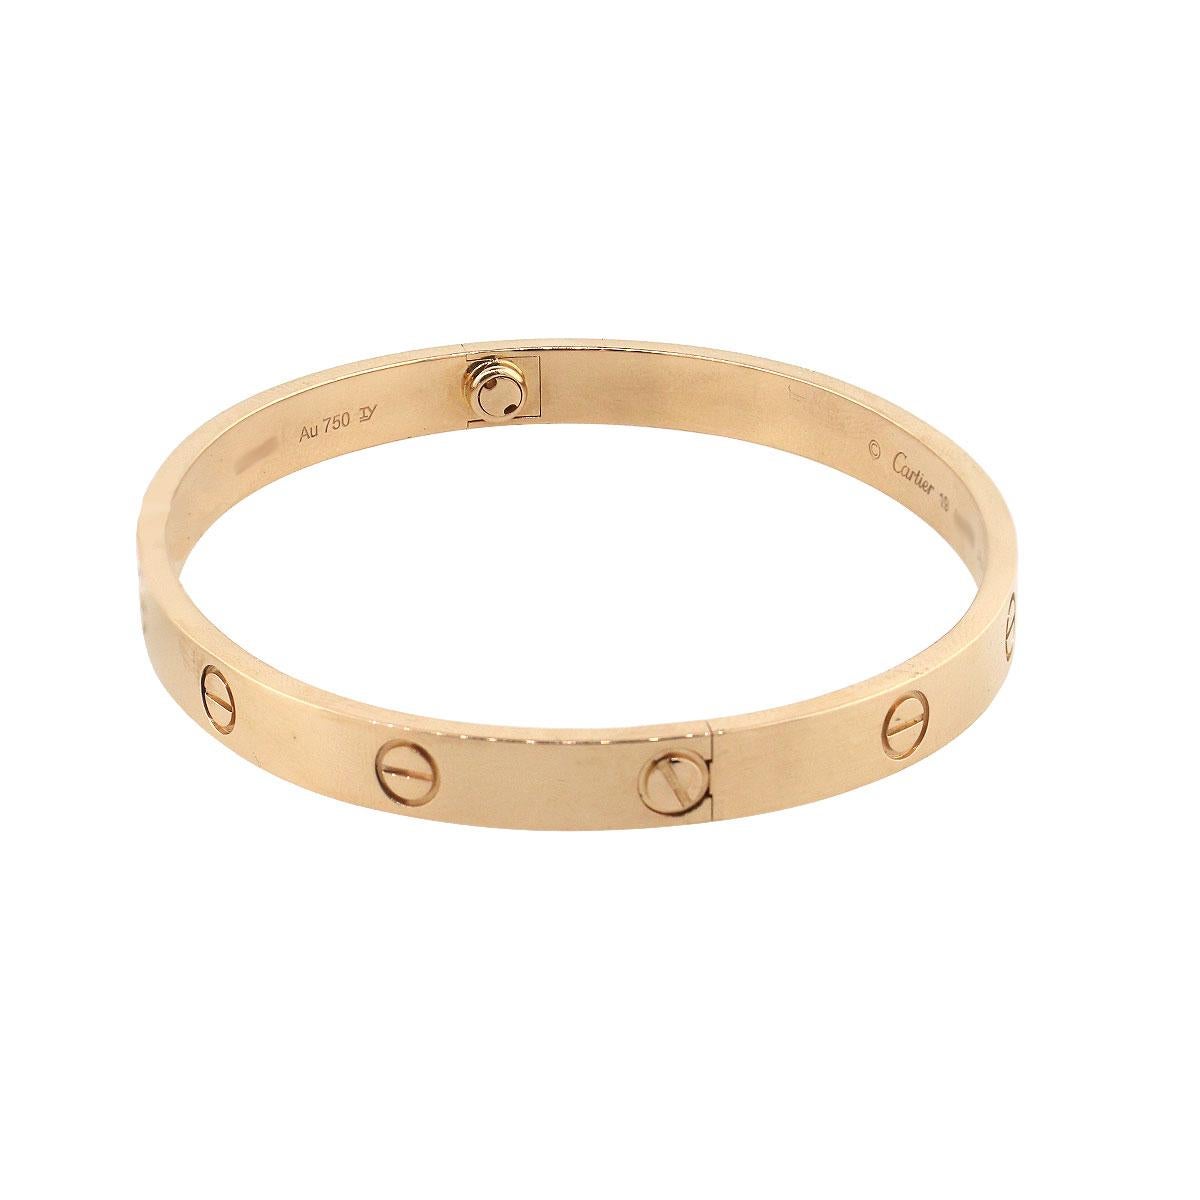 Designer: Cartier
Material: 18k Rose Gold
Style: New Style Love Bangle
Bangle Size: Cartier size 19
Total Weight: 35.8g (23dwt)
Additional Details: This item includes Cartier papers and Cartier screwdriver!
SKU: G9580